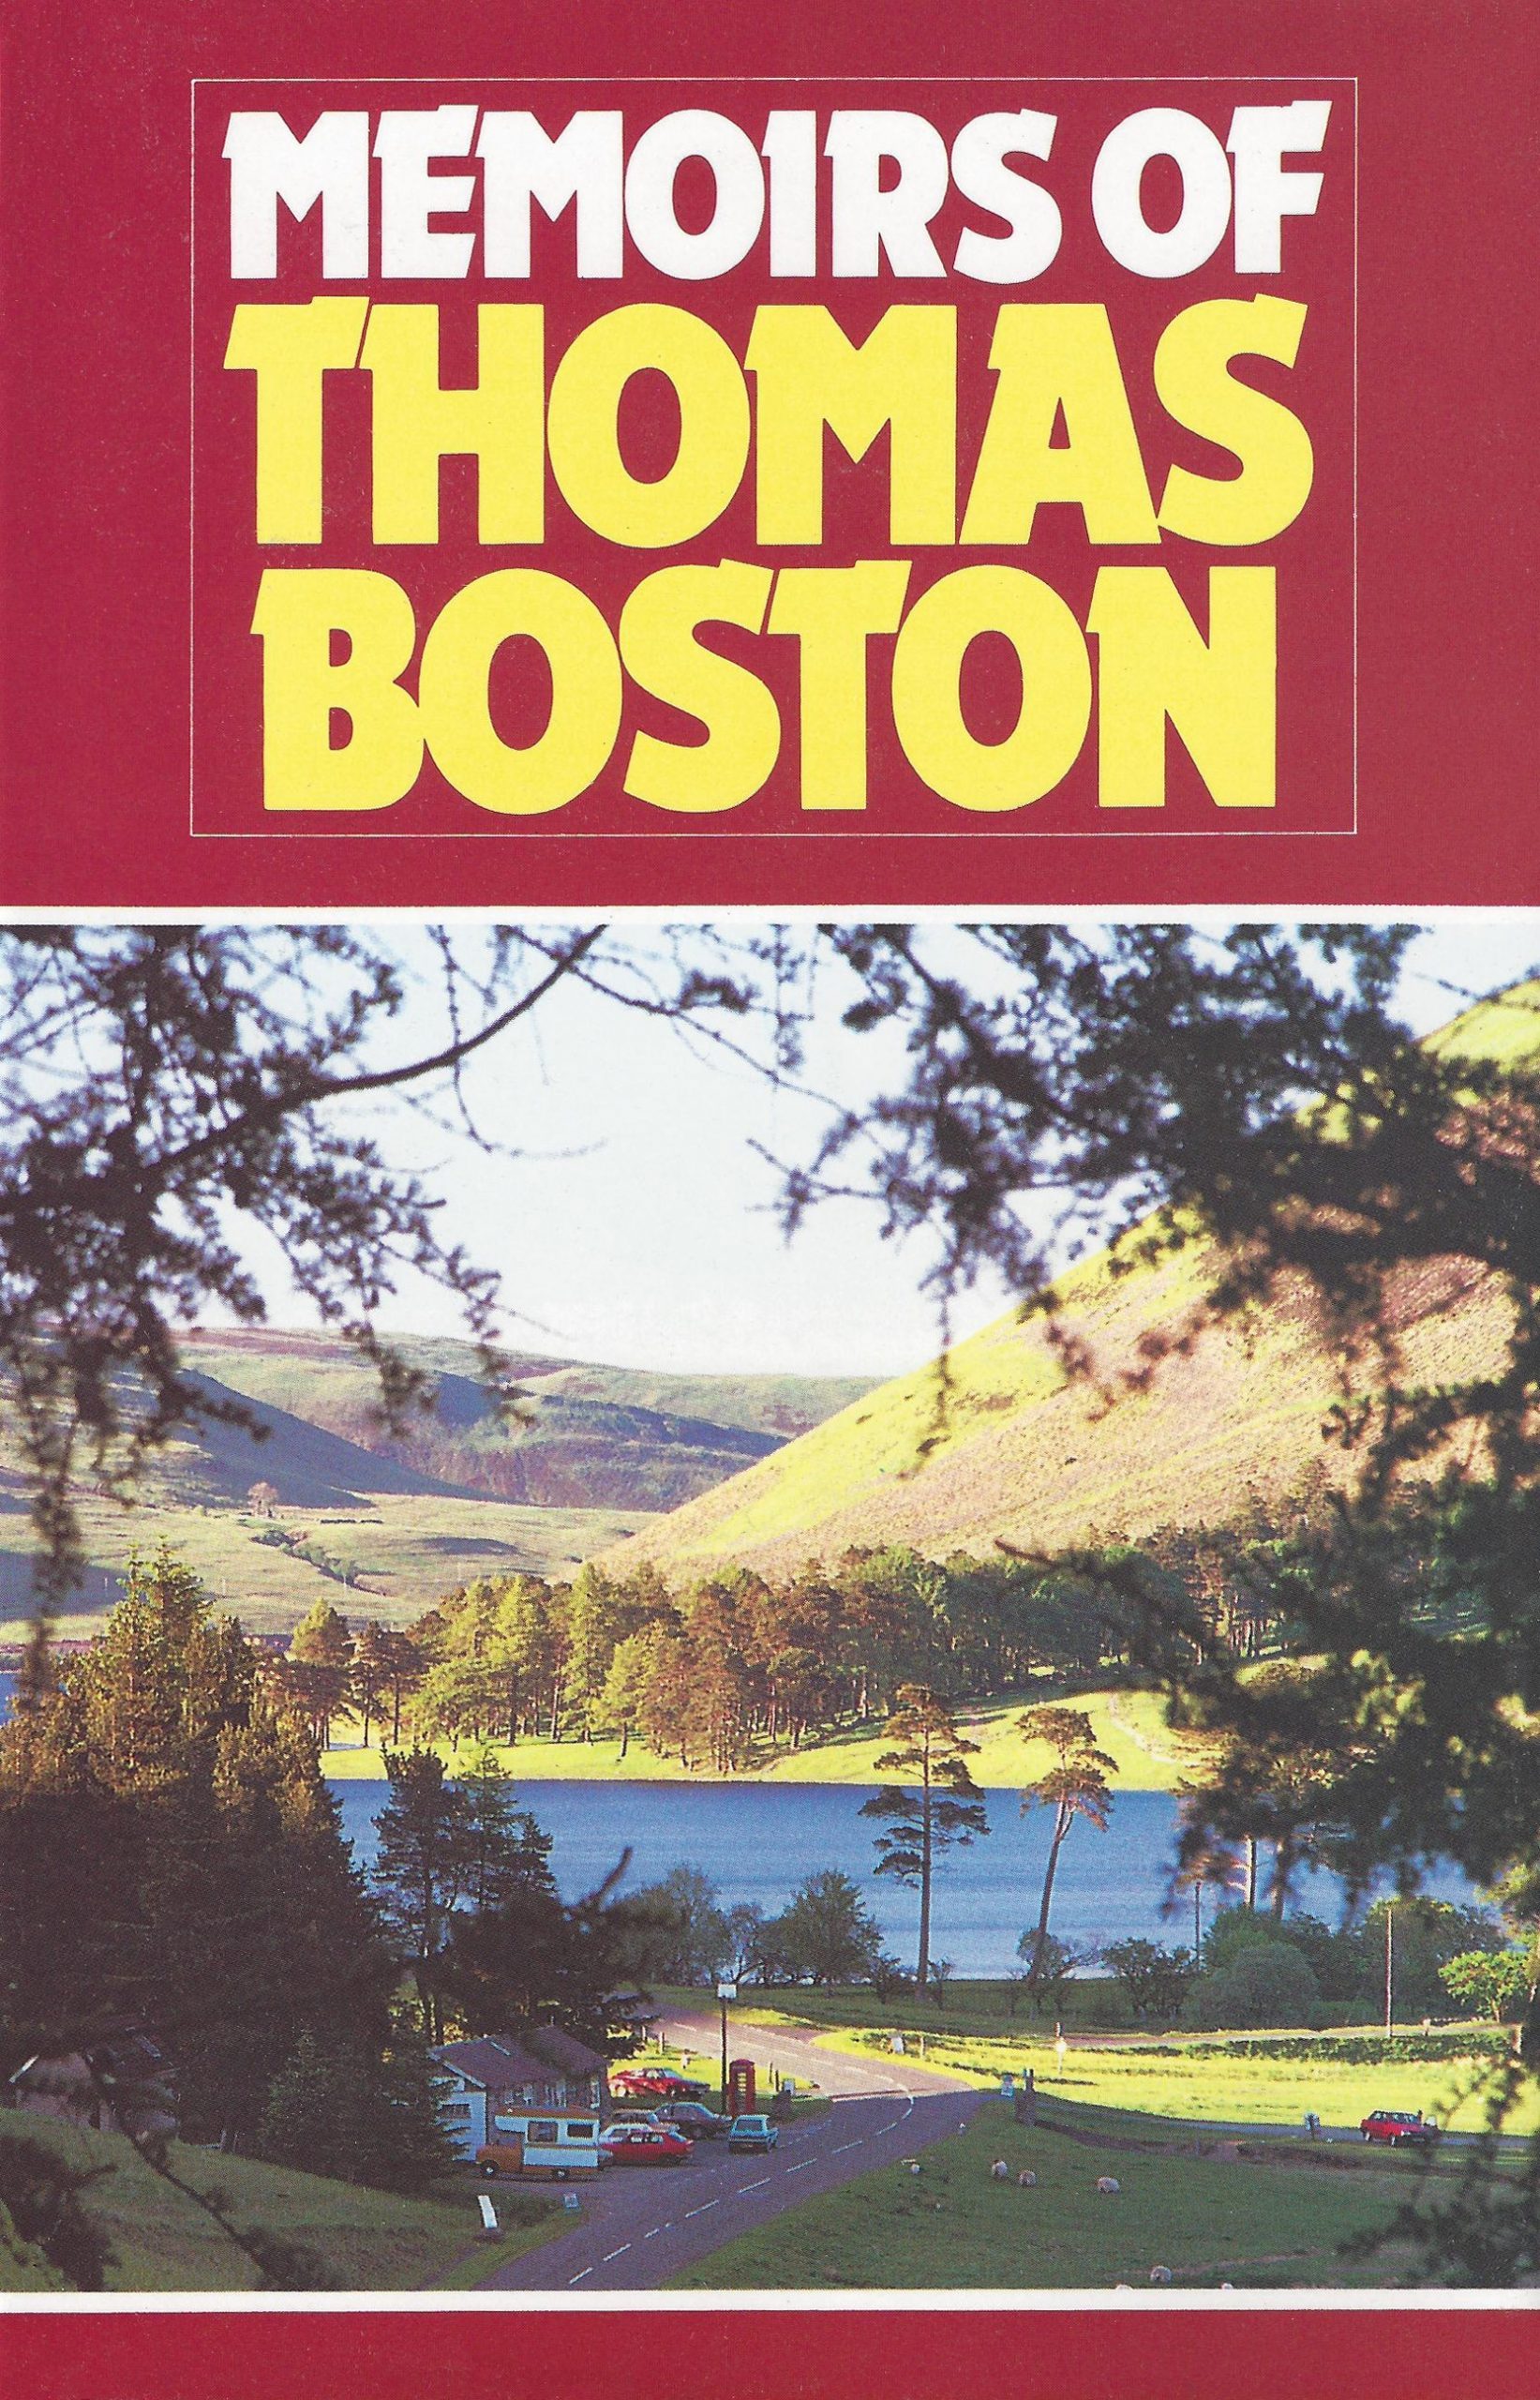 Book Cover for 'Memoirs Of Thomas Boston'